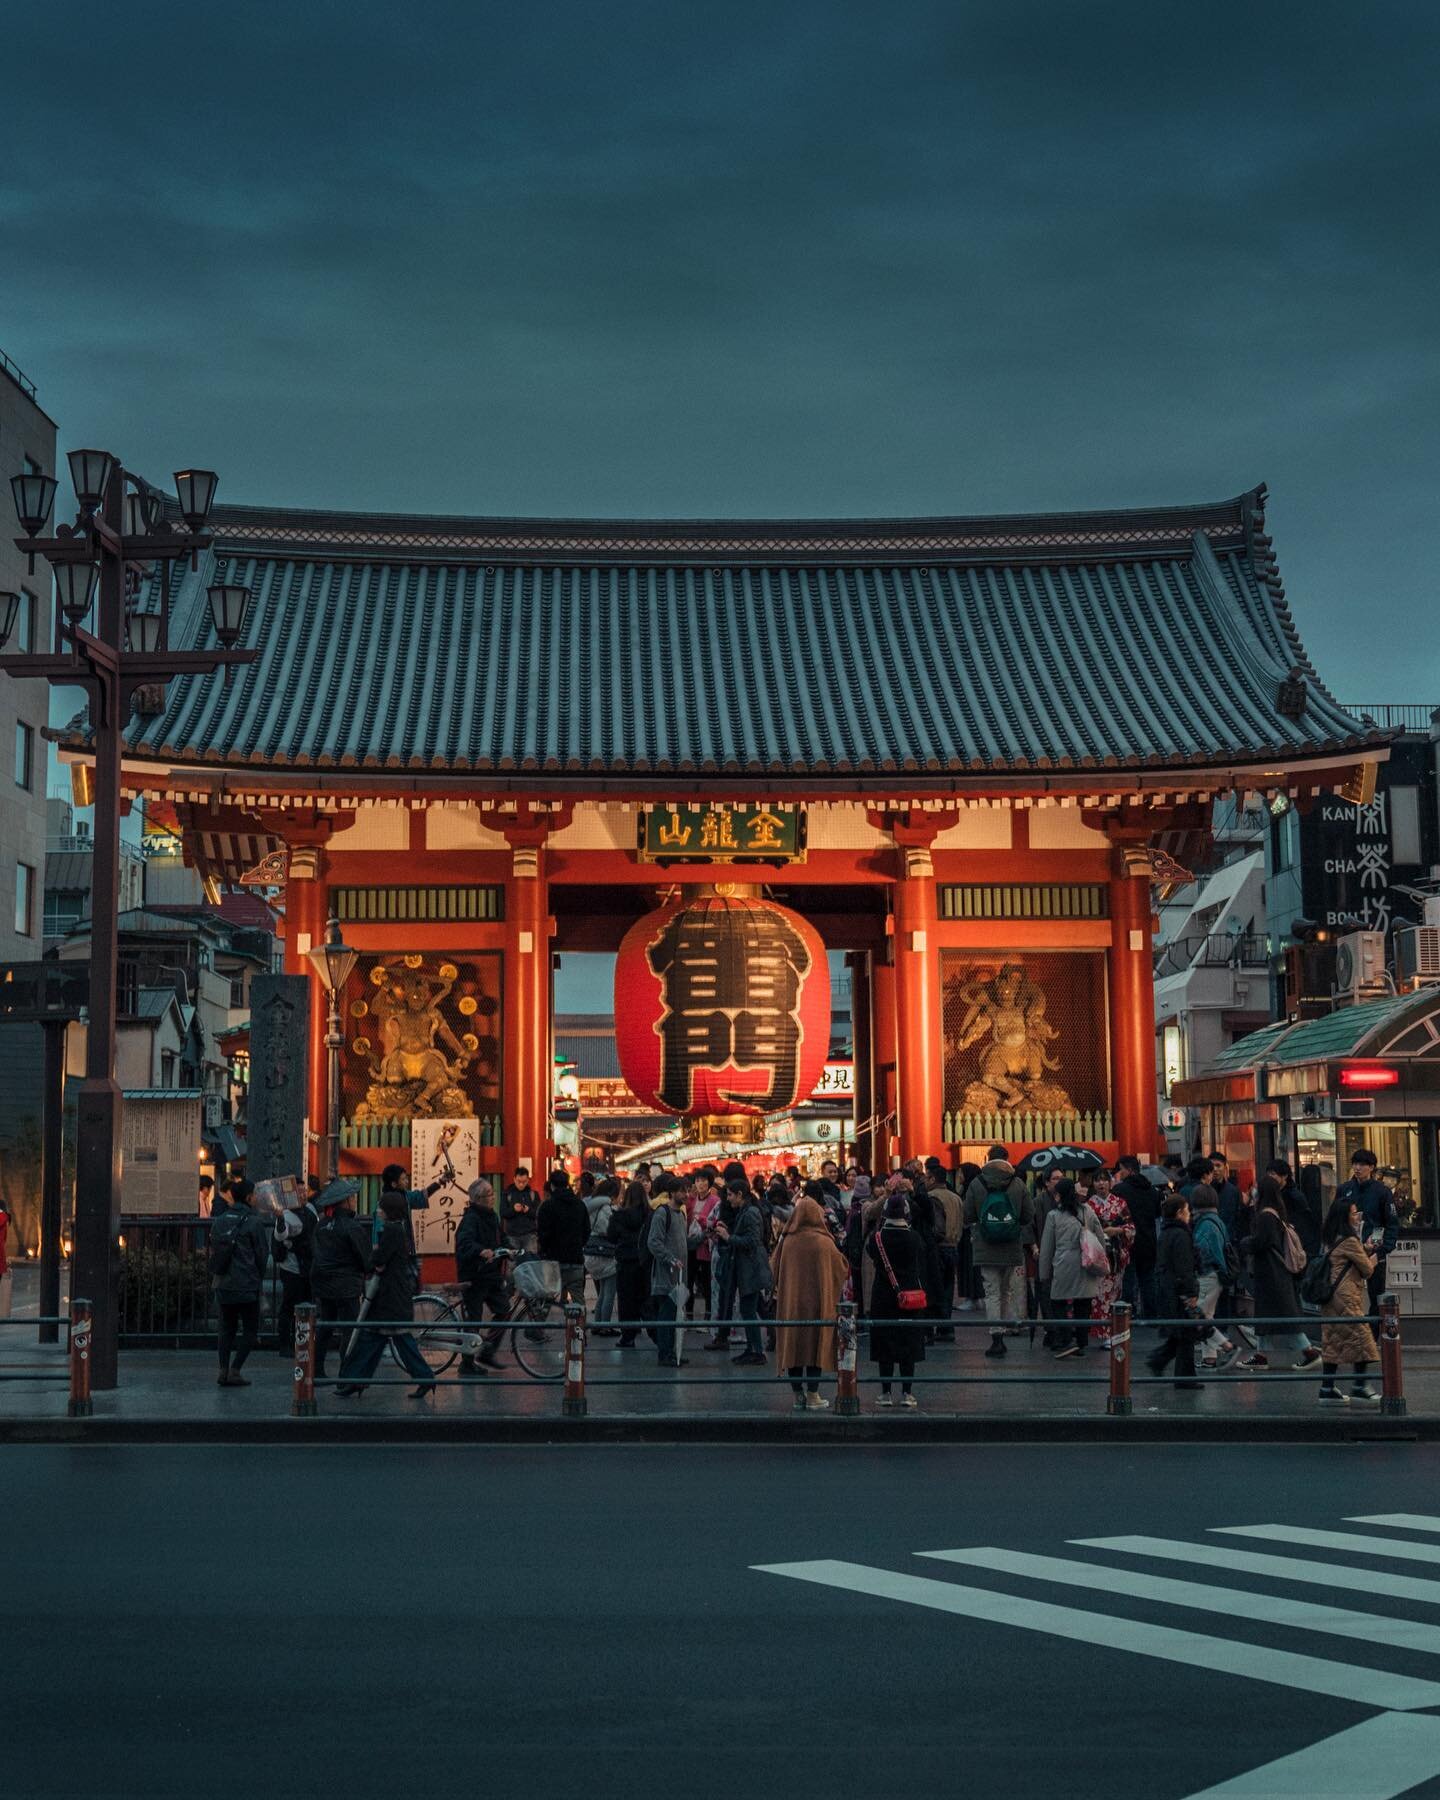 Tonight, I was just watching @rion_tv_japan &lsquo;s newest video, where he showed how Tokyo&rsquo;s looking like these days. First stop was in Asakusa as he walk into this very spot, the Kaminarimon Gate (雷門). The video hit extra hard and made me lo